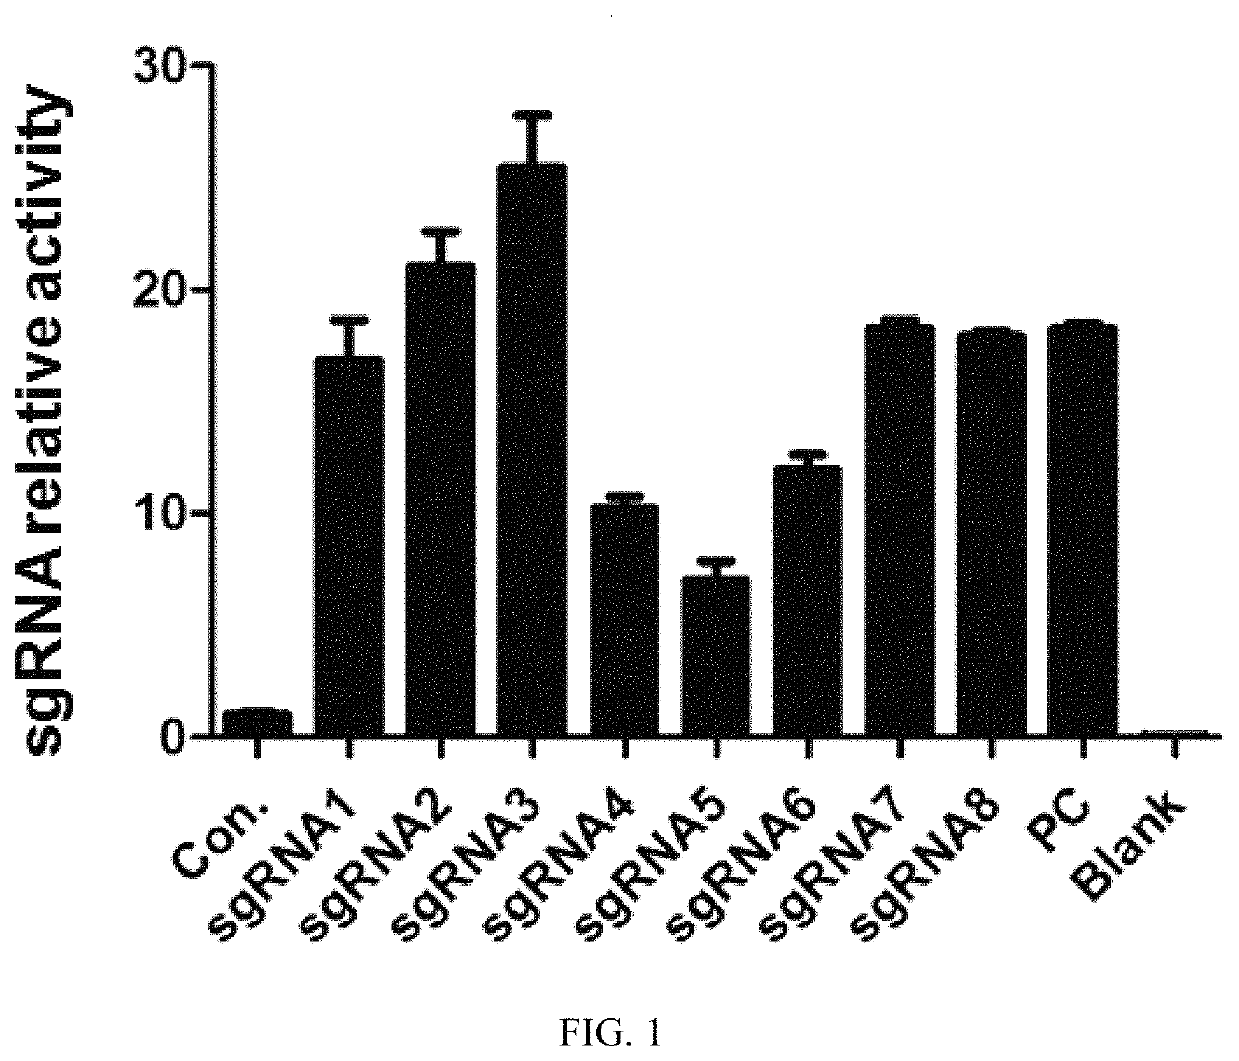 Genetically modified mice expressing humanized PD-1